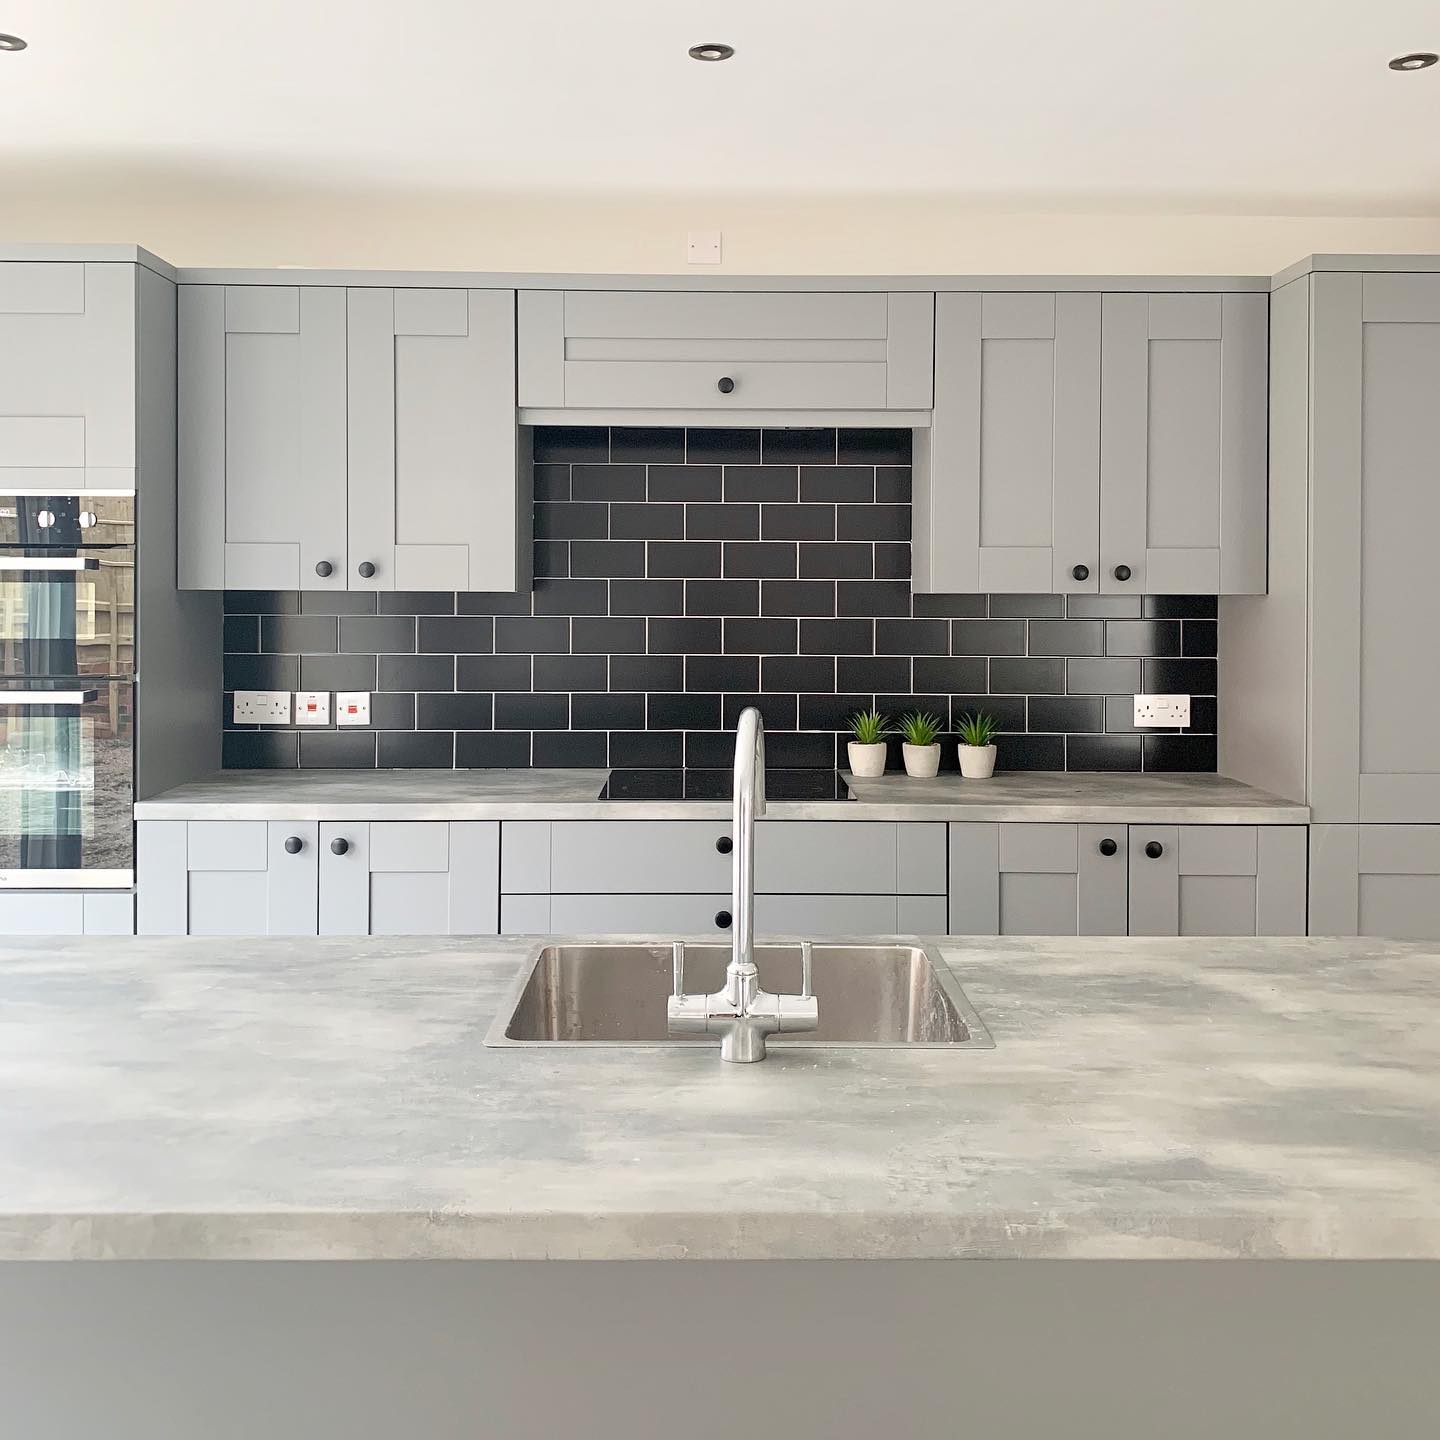 Charworth Homes - grey kitchen with statement tiles in black